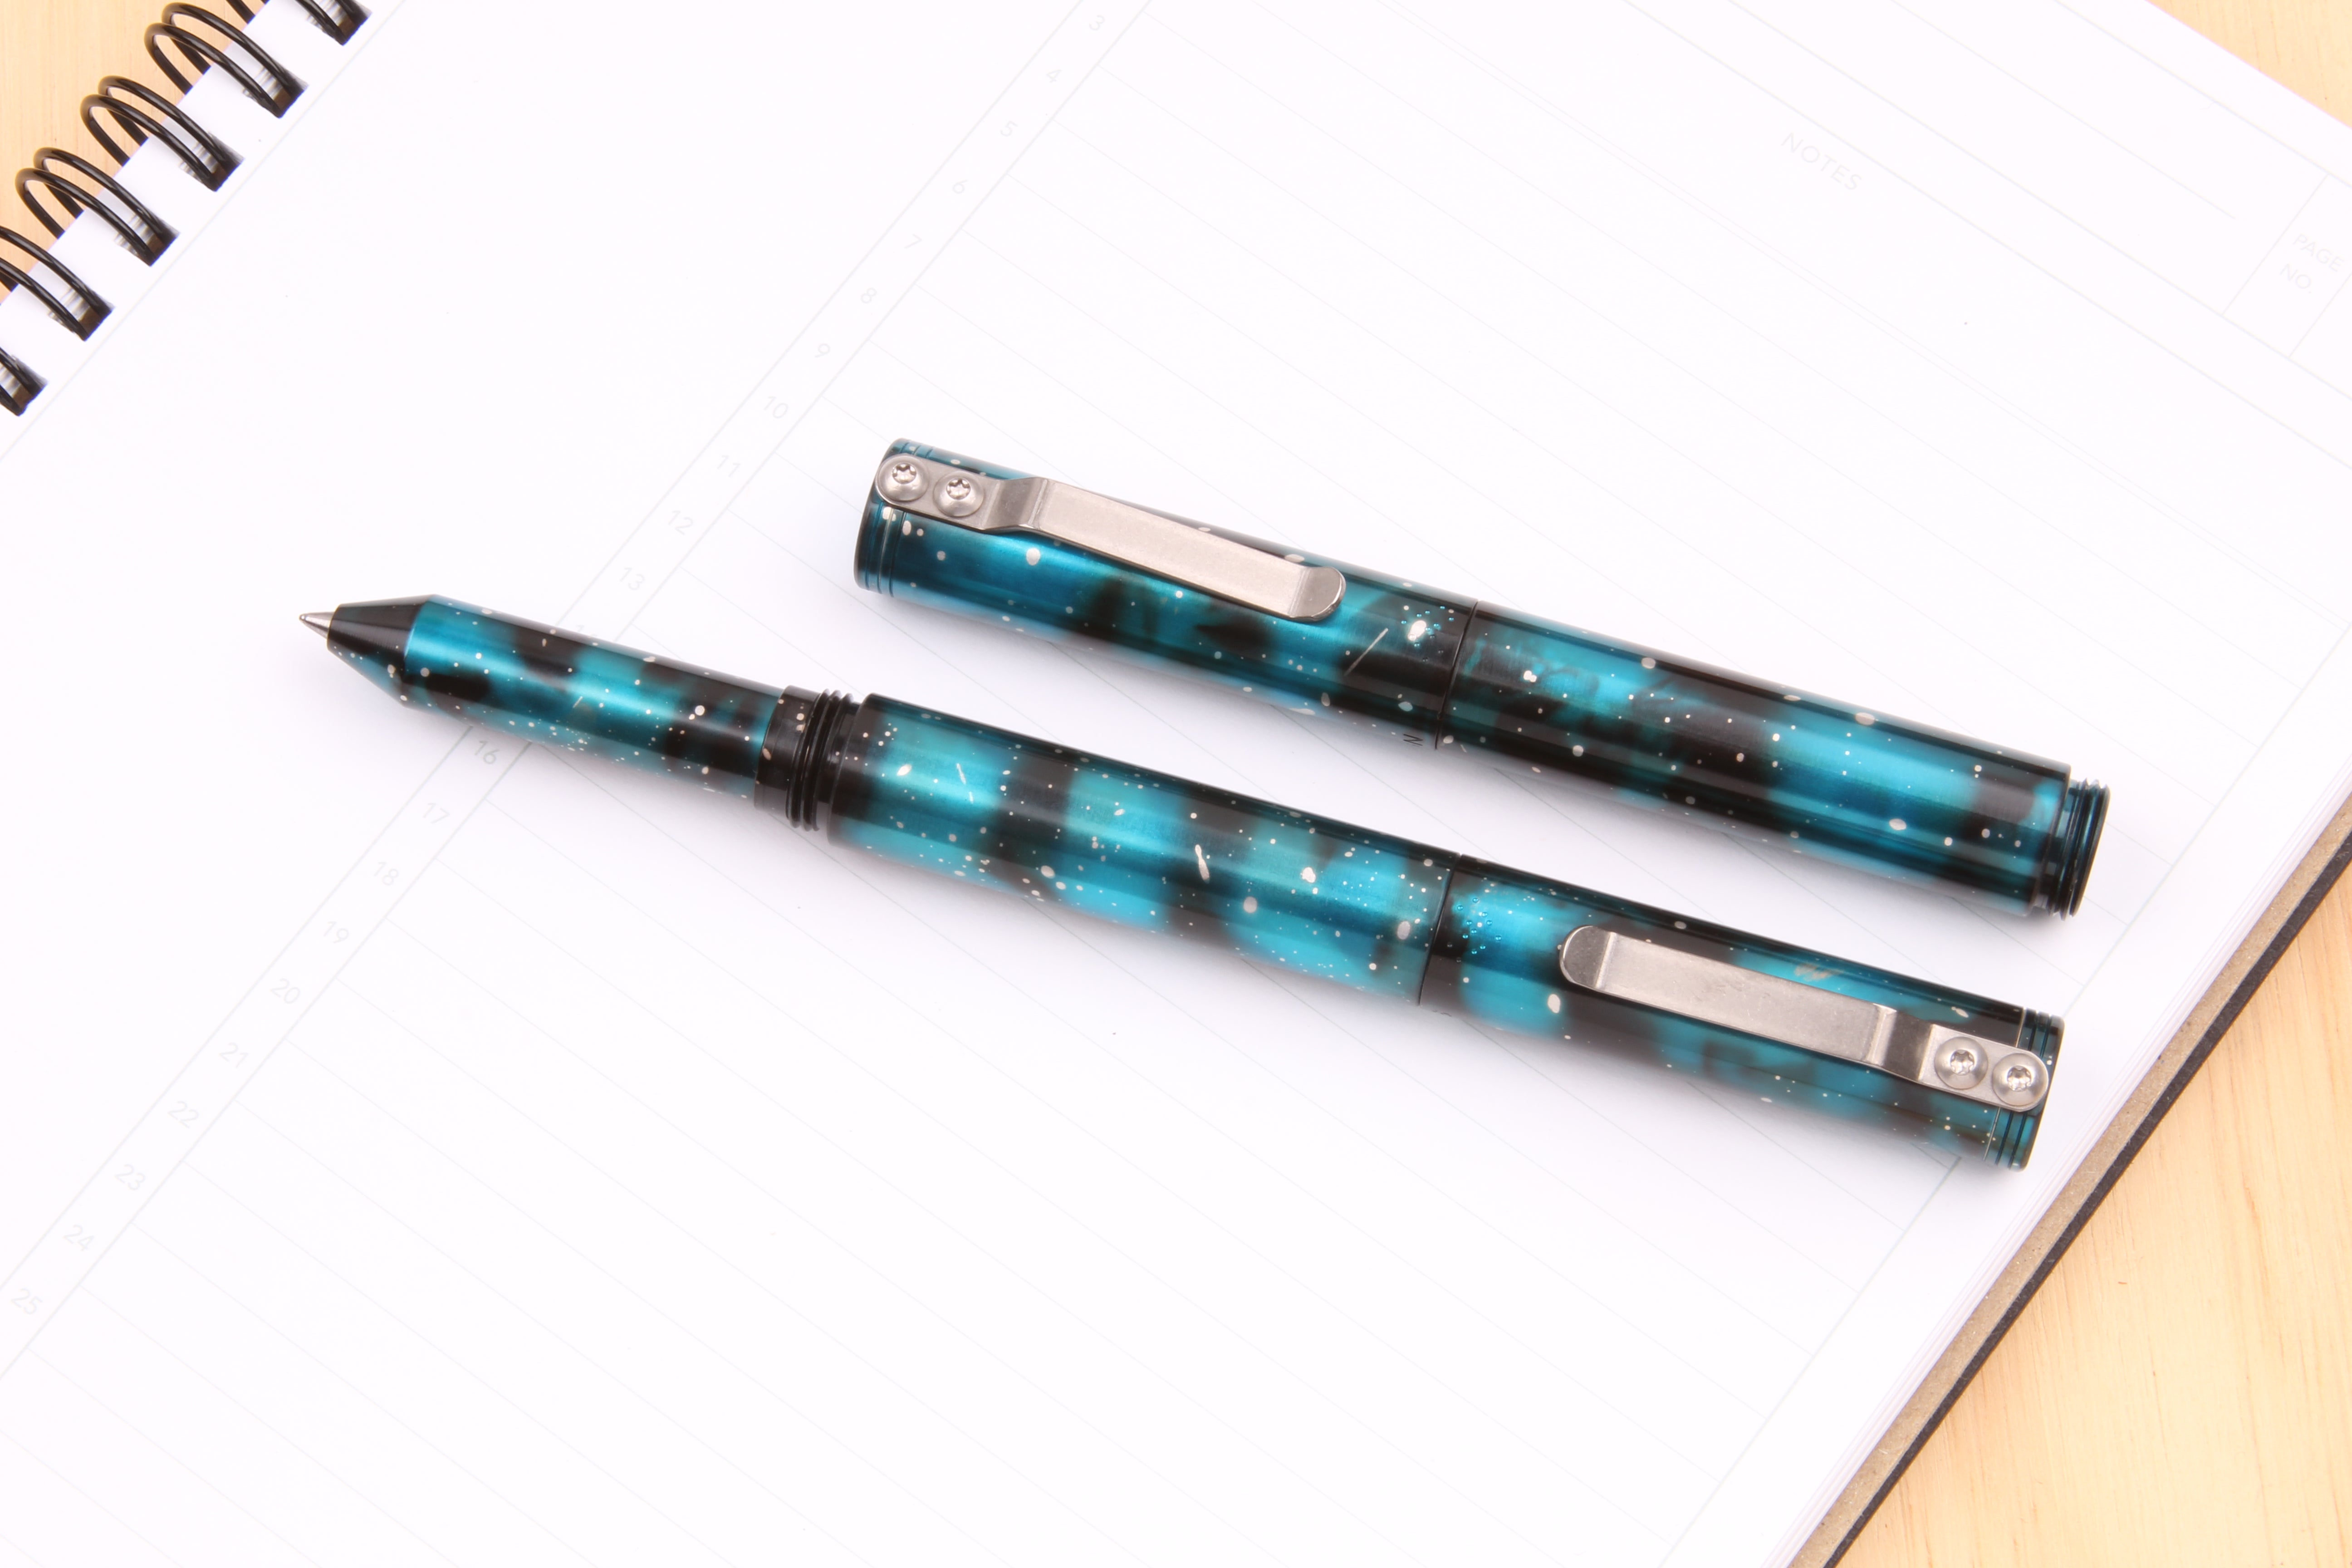 The Machined Pen V2 - The Anniversary Edition